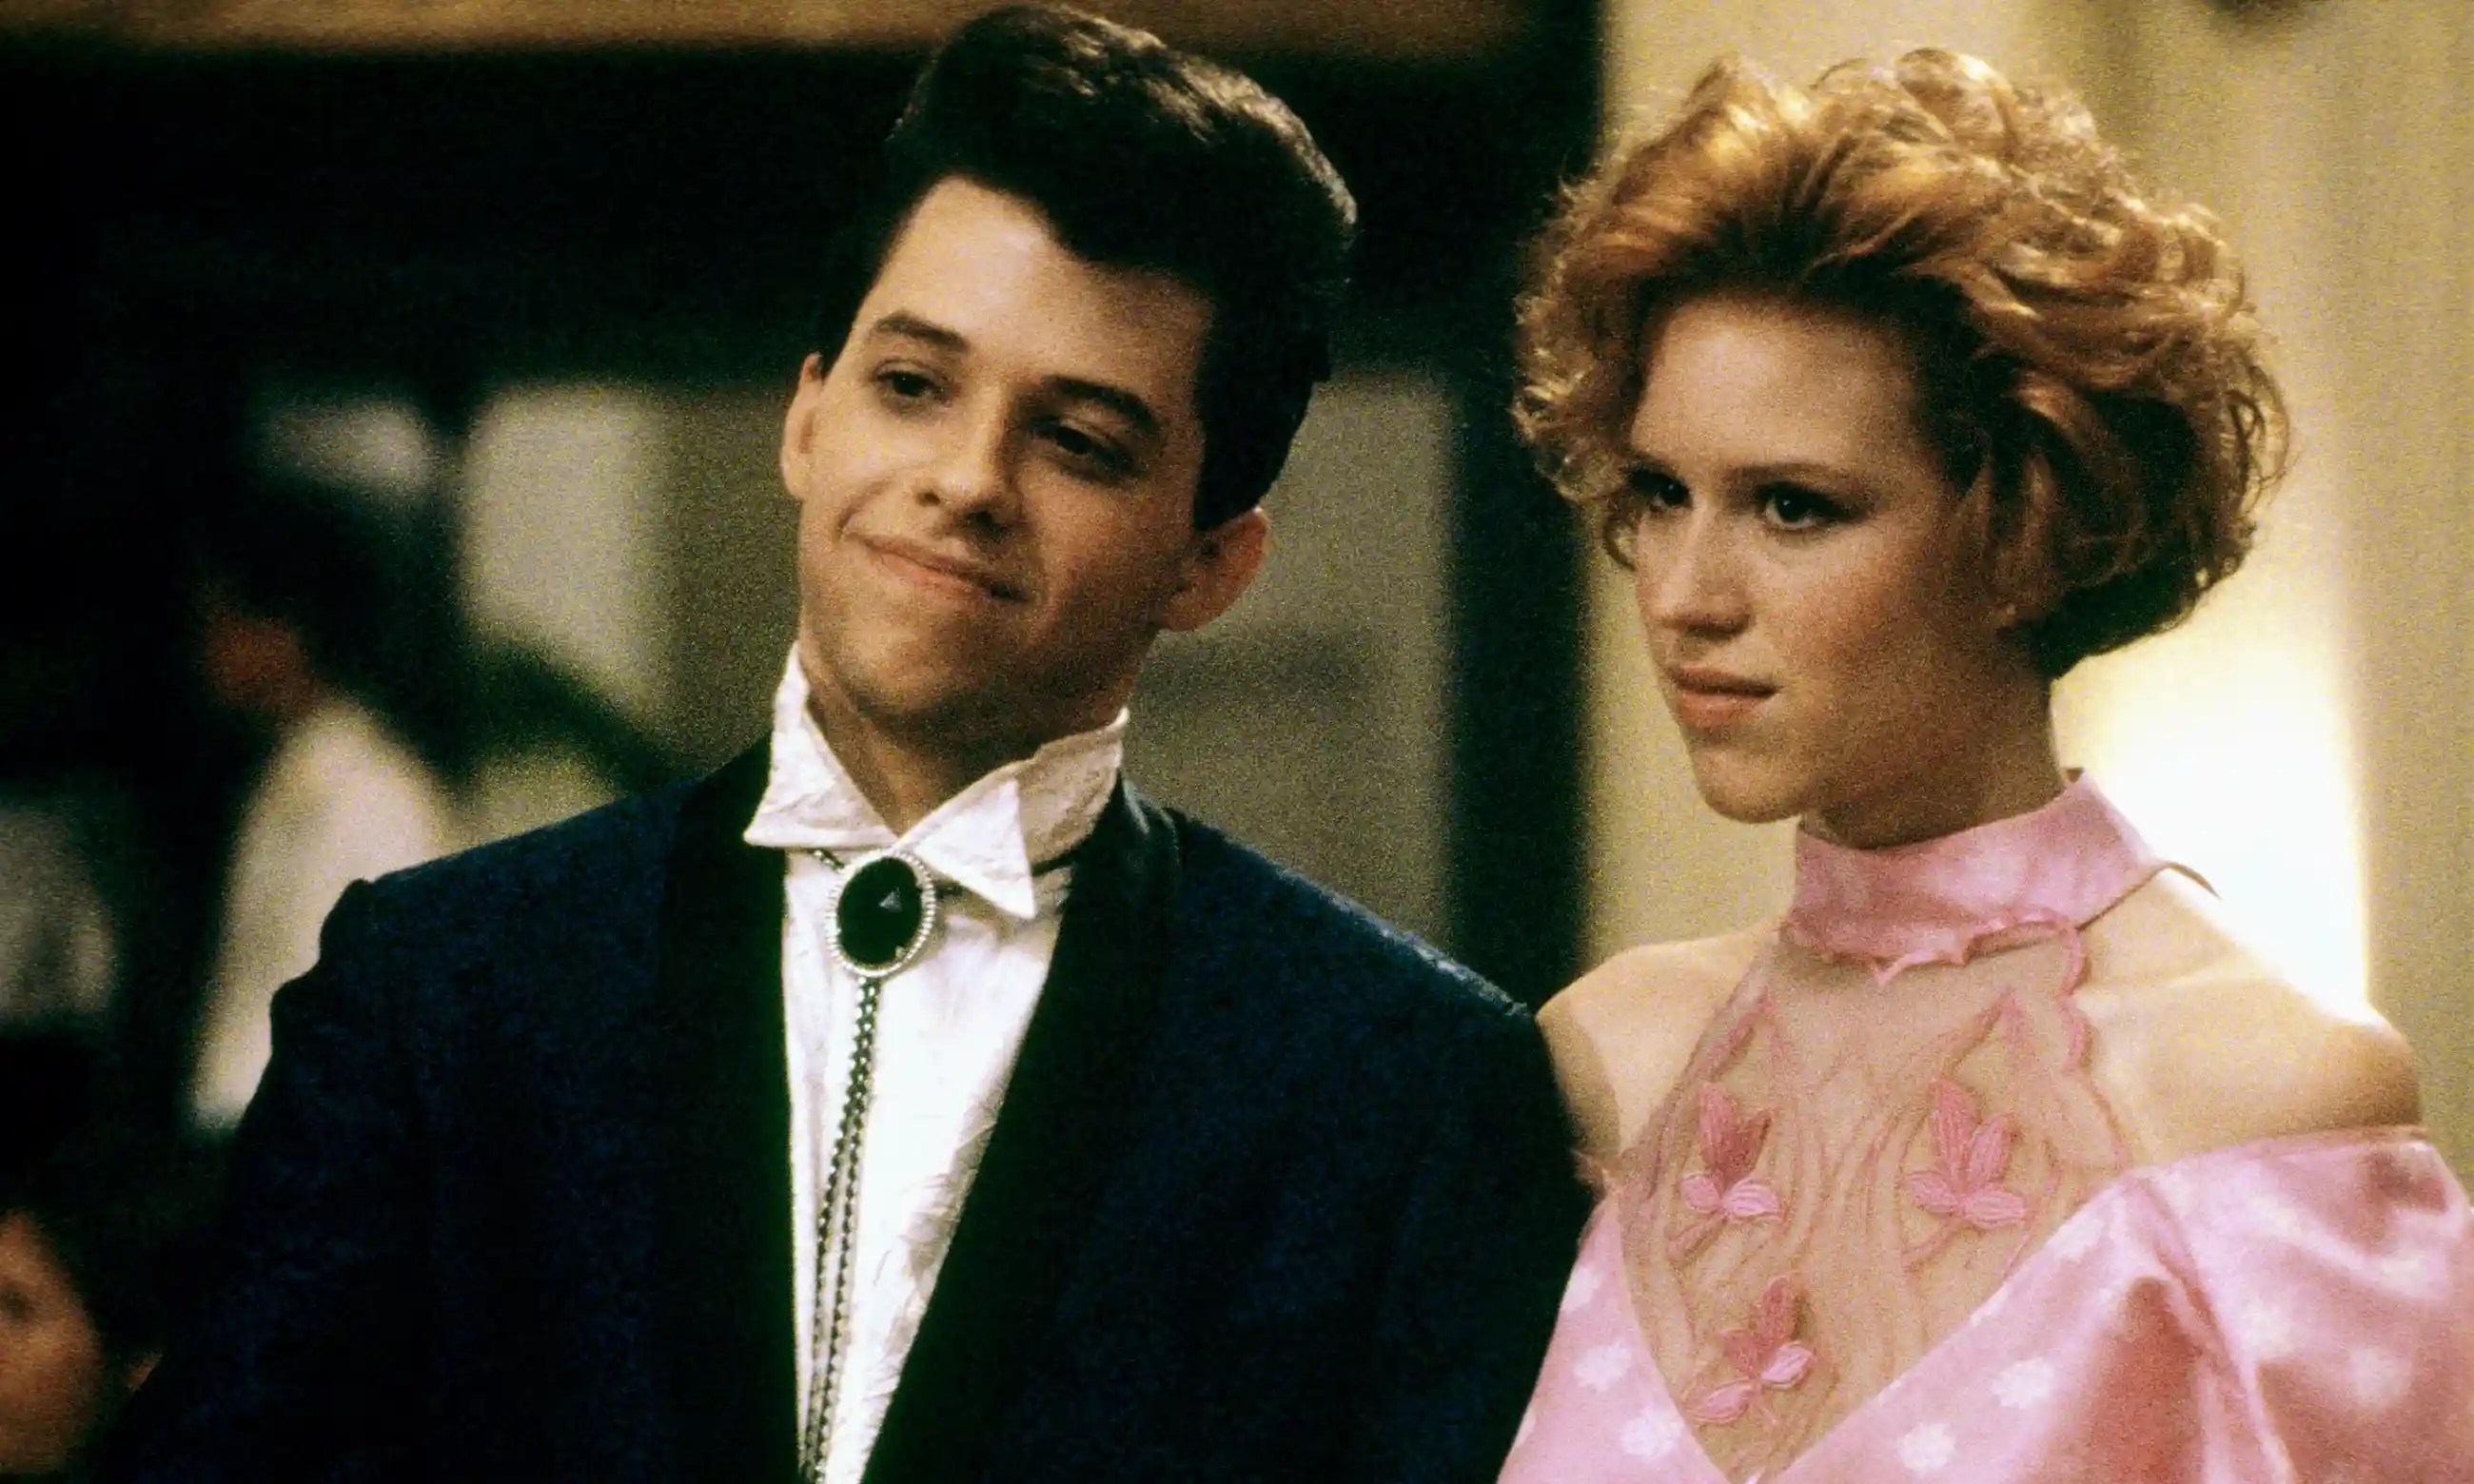 Opinion: John Hughes’ ‘Sixteen Candles’ panders blatantly to racist stereotypes